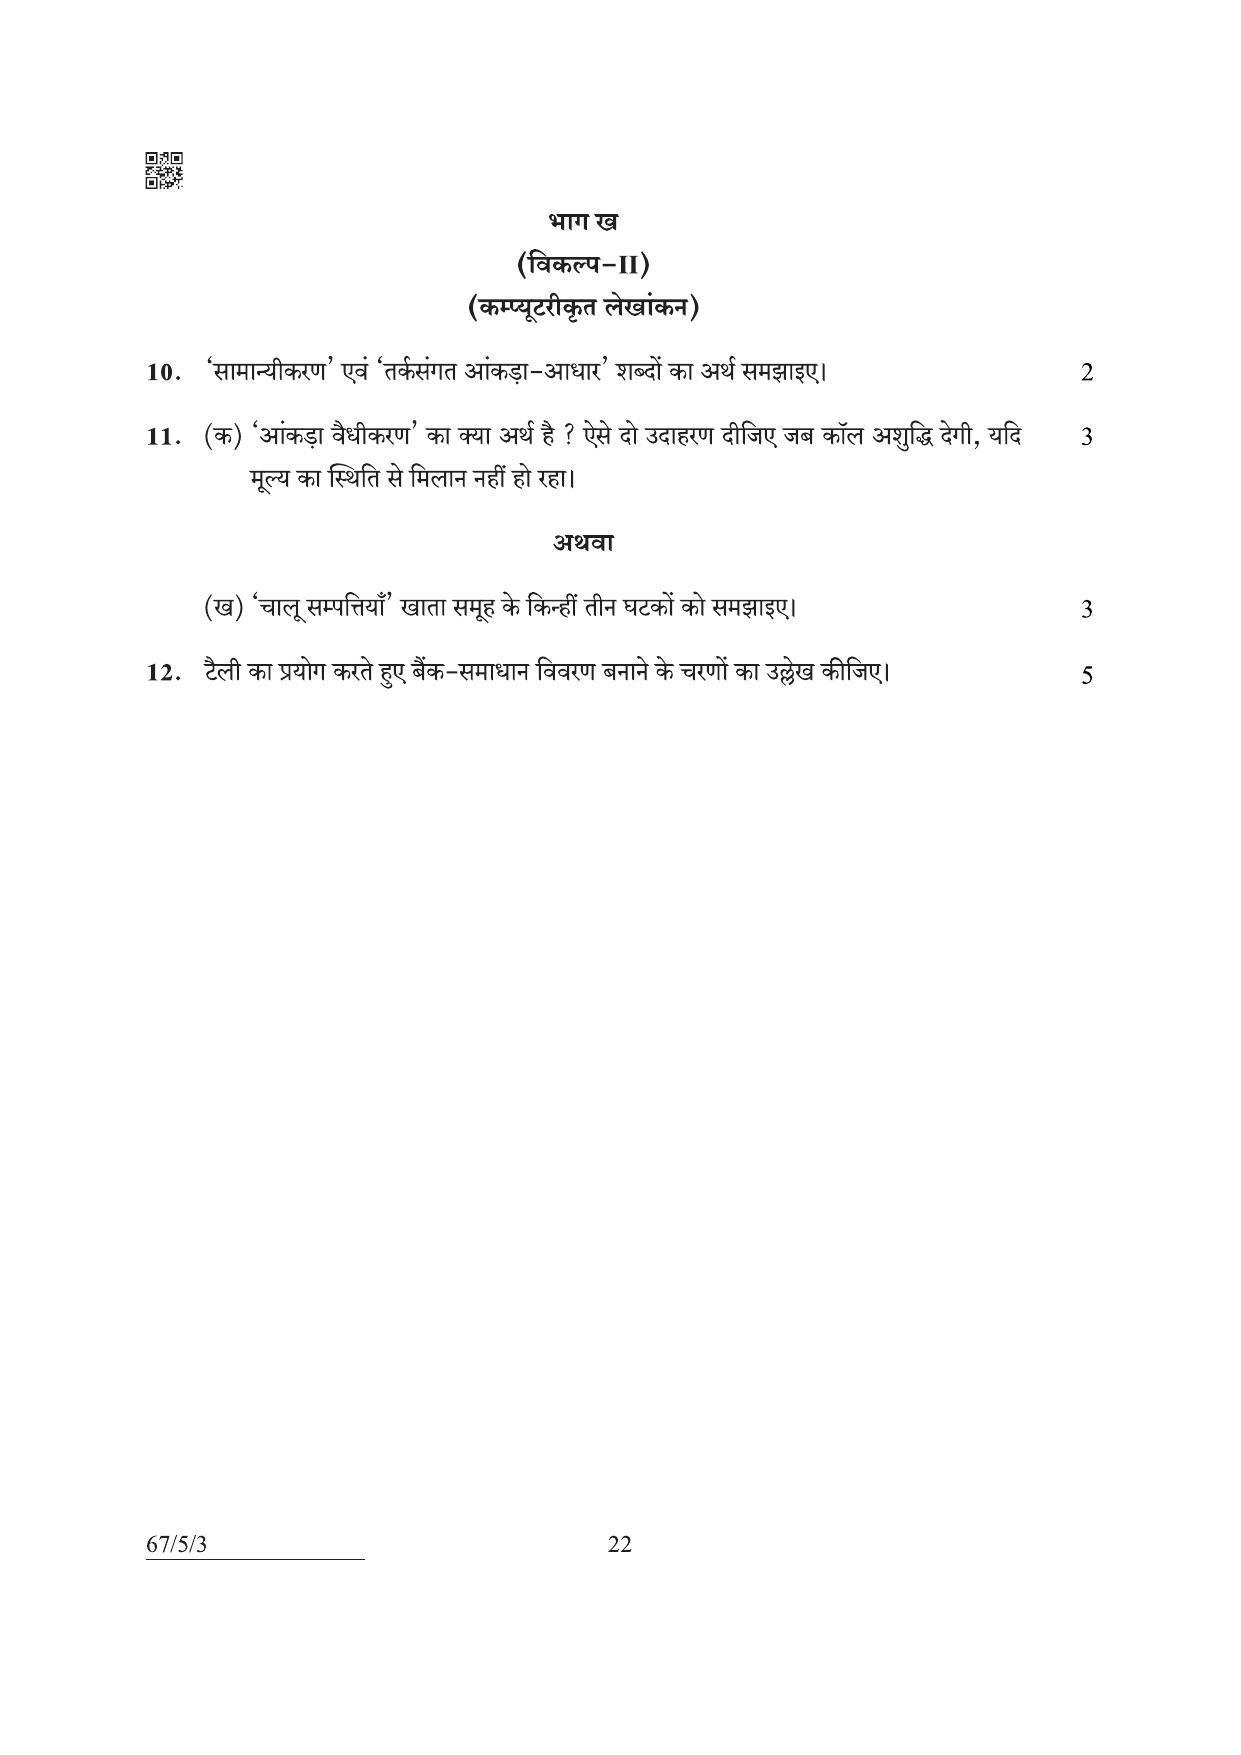 CBSE Class 12 67-5-3 Accountancy 2022 Question Paper - Page 22